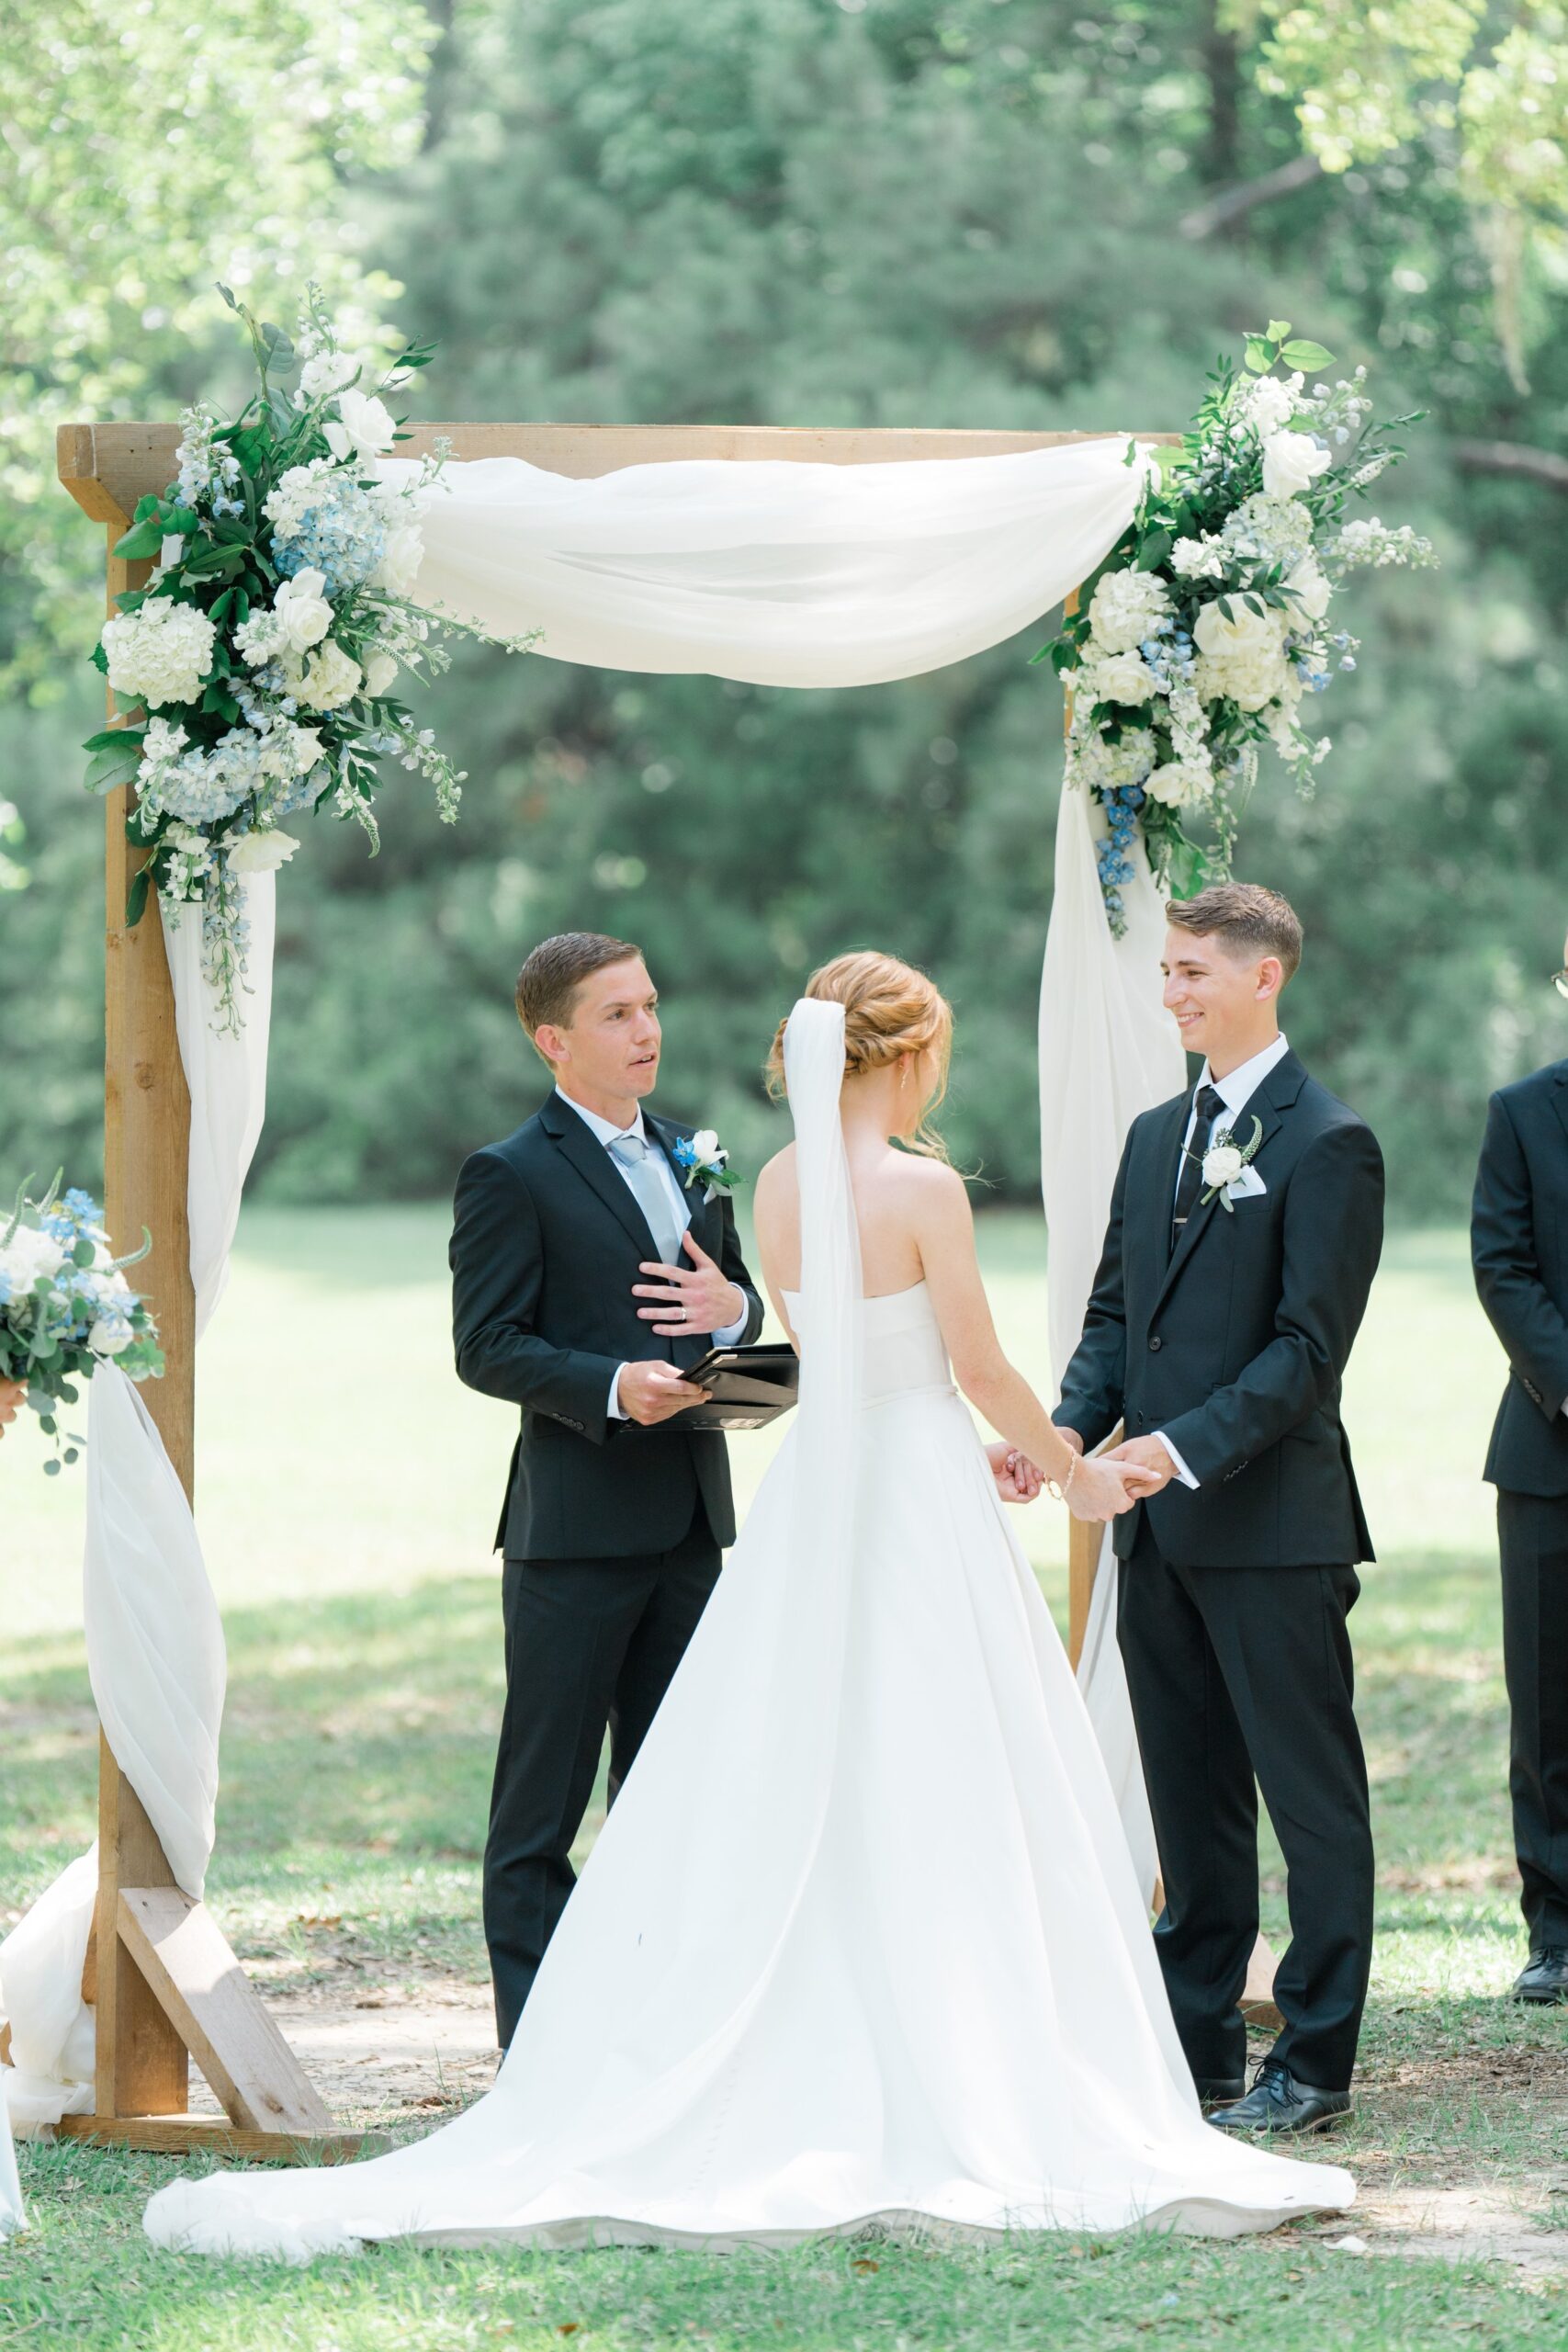 intimate moment at wedding ceremony with bride and groom holding hands